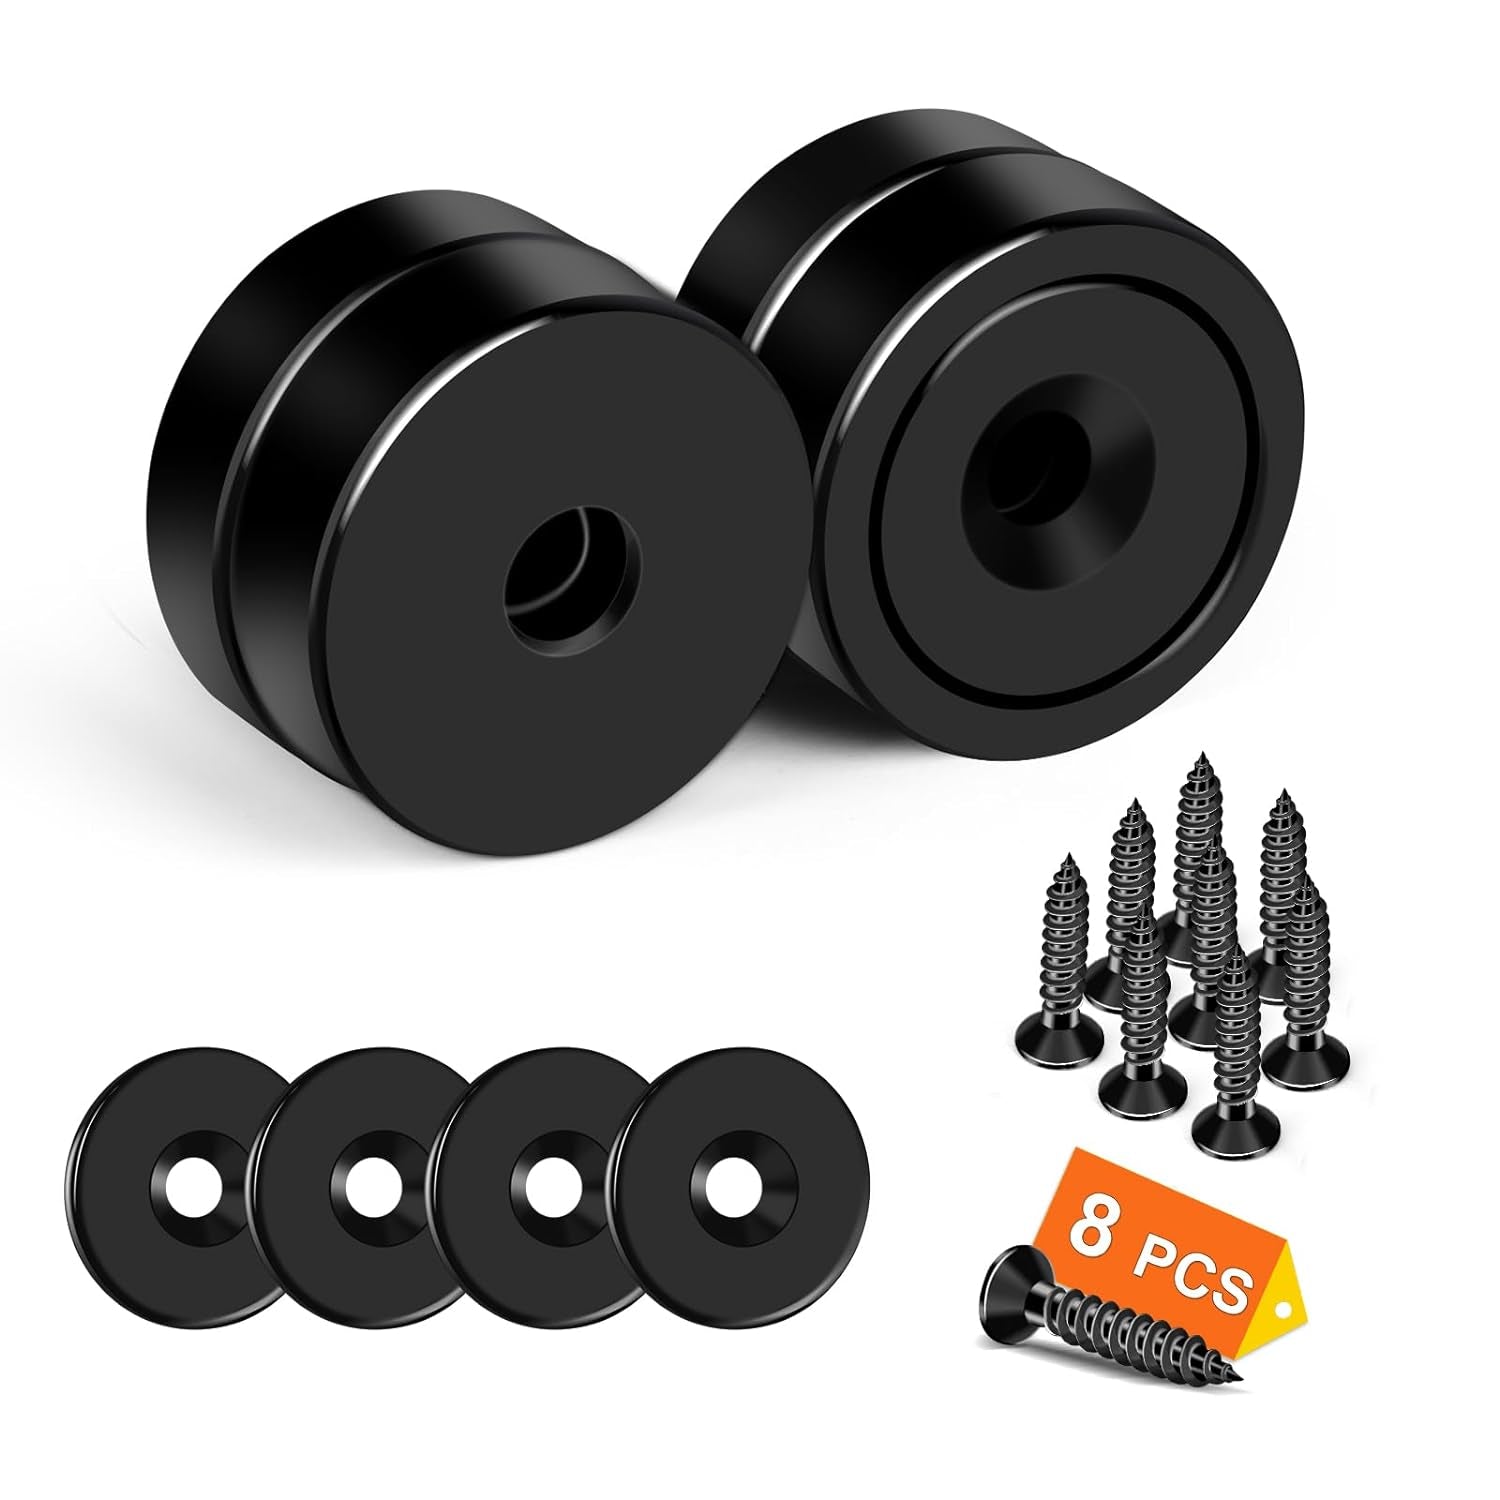 DIYMAG 12Pcs Neodymium round Base Cup Magnet, 40LBS Strong Rare Earth Magnets with Heavy Duty Countersunk Hole and Stainless Screws for Refrigerator Magnets Office Craft 0.79 X 0.2 Inch (Black)